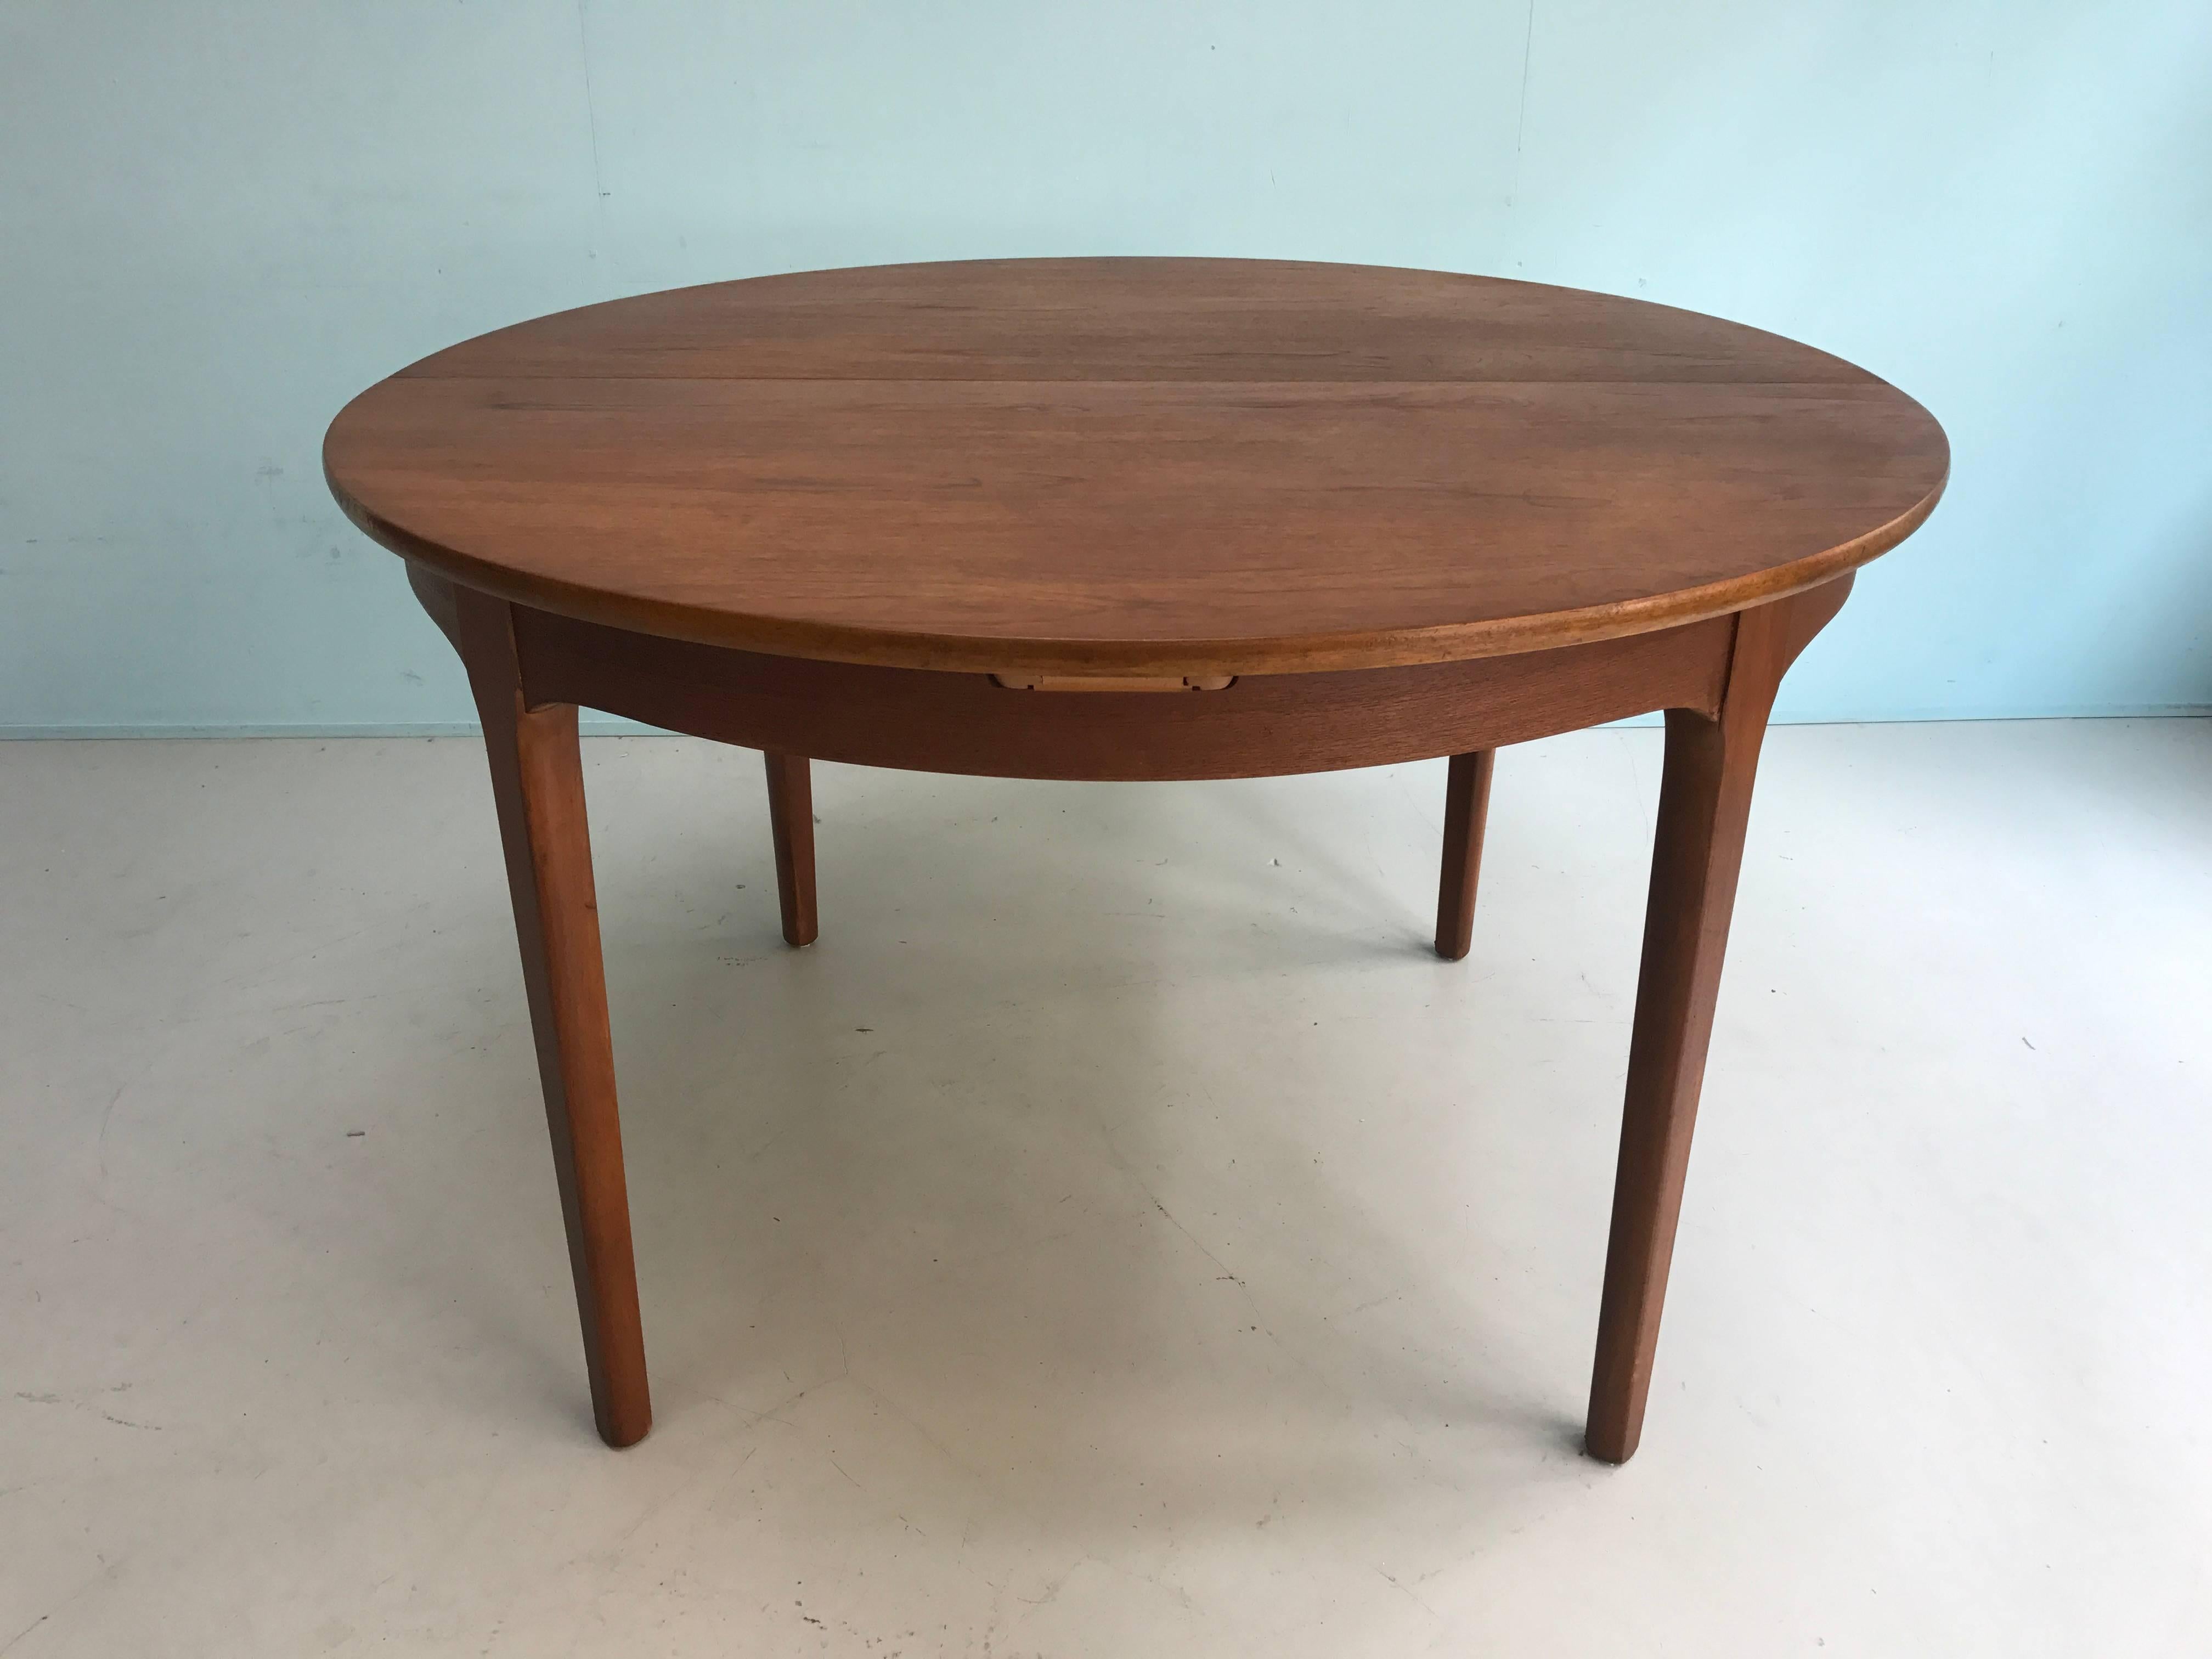 Teak vintage round folding table with easy system from the 1960s, England.
    